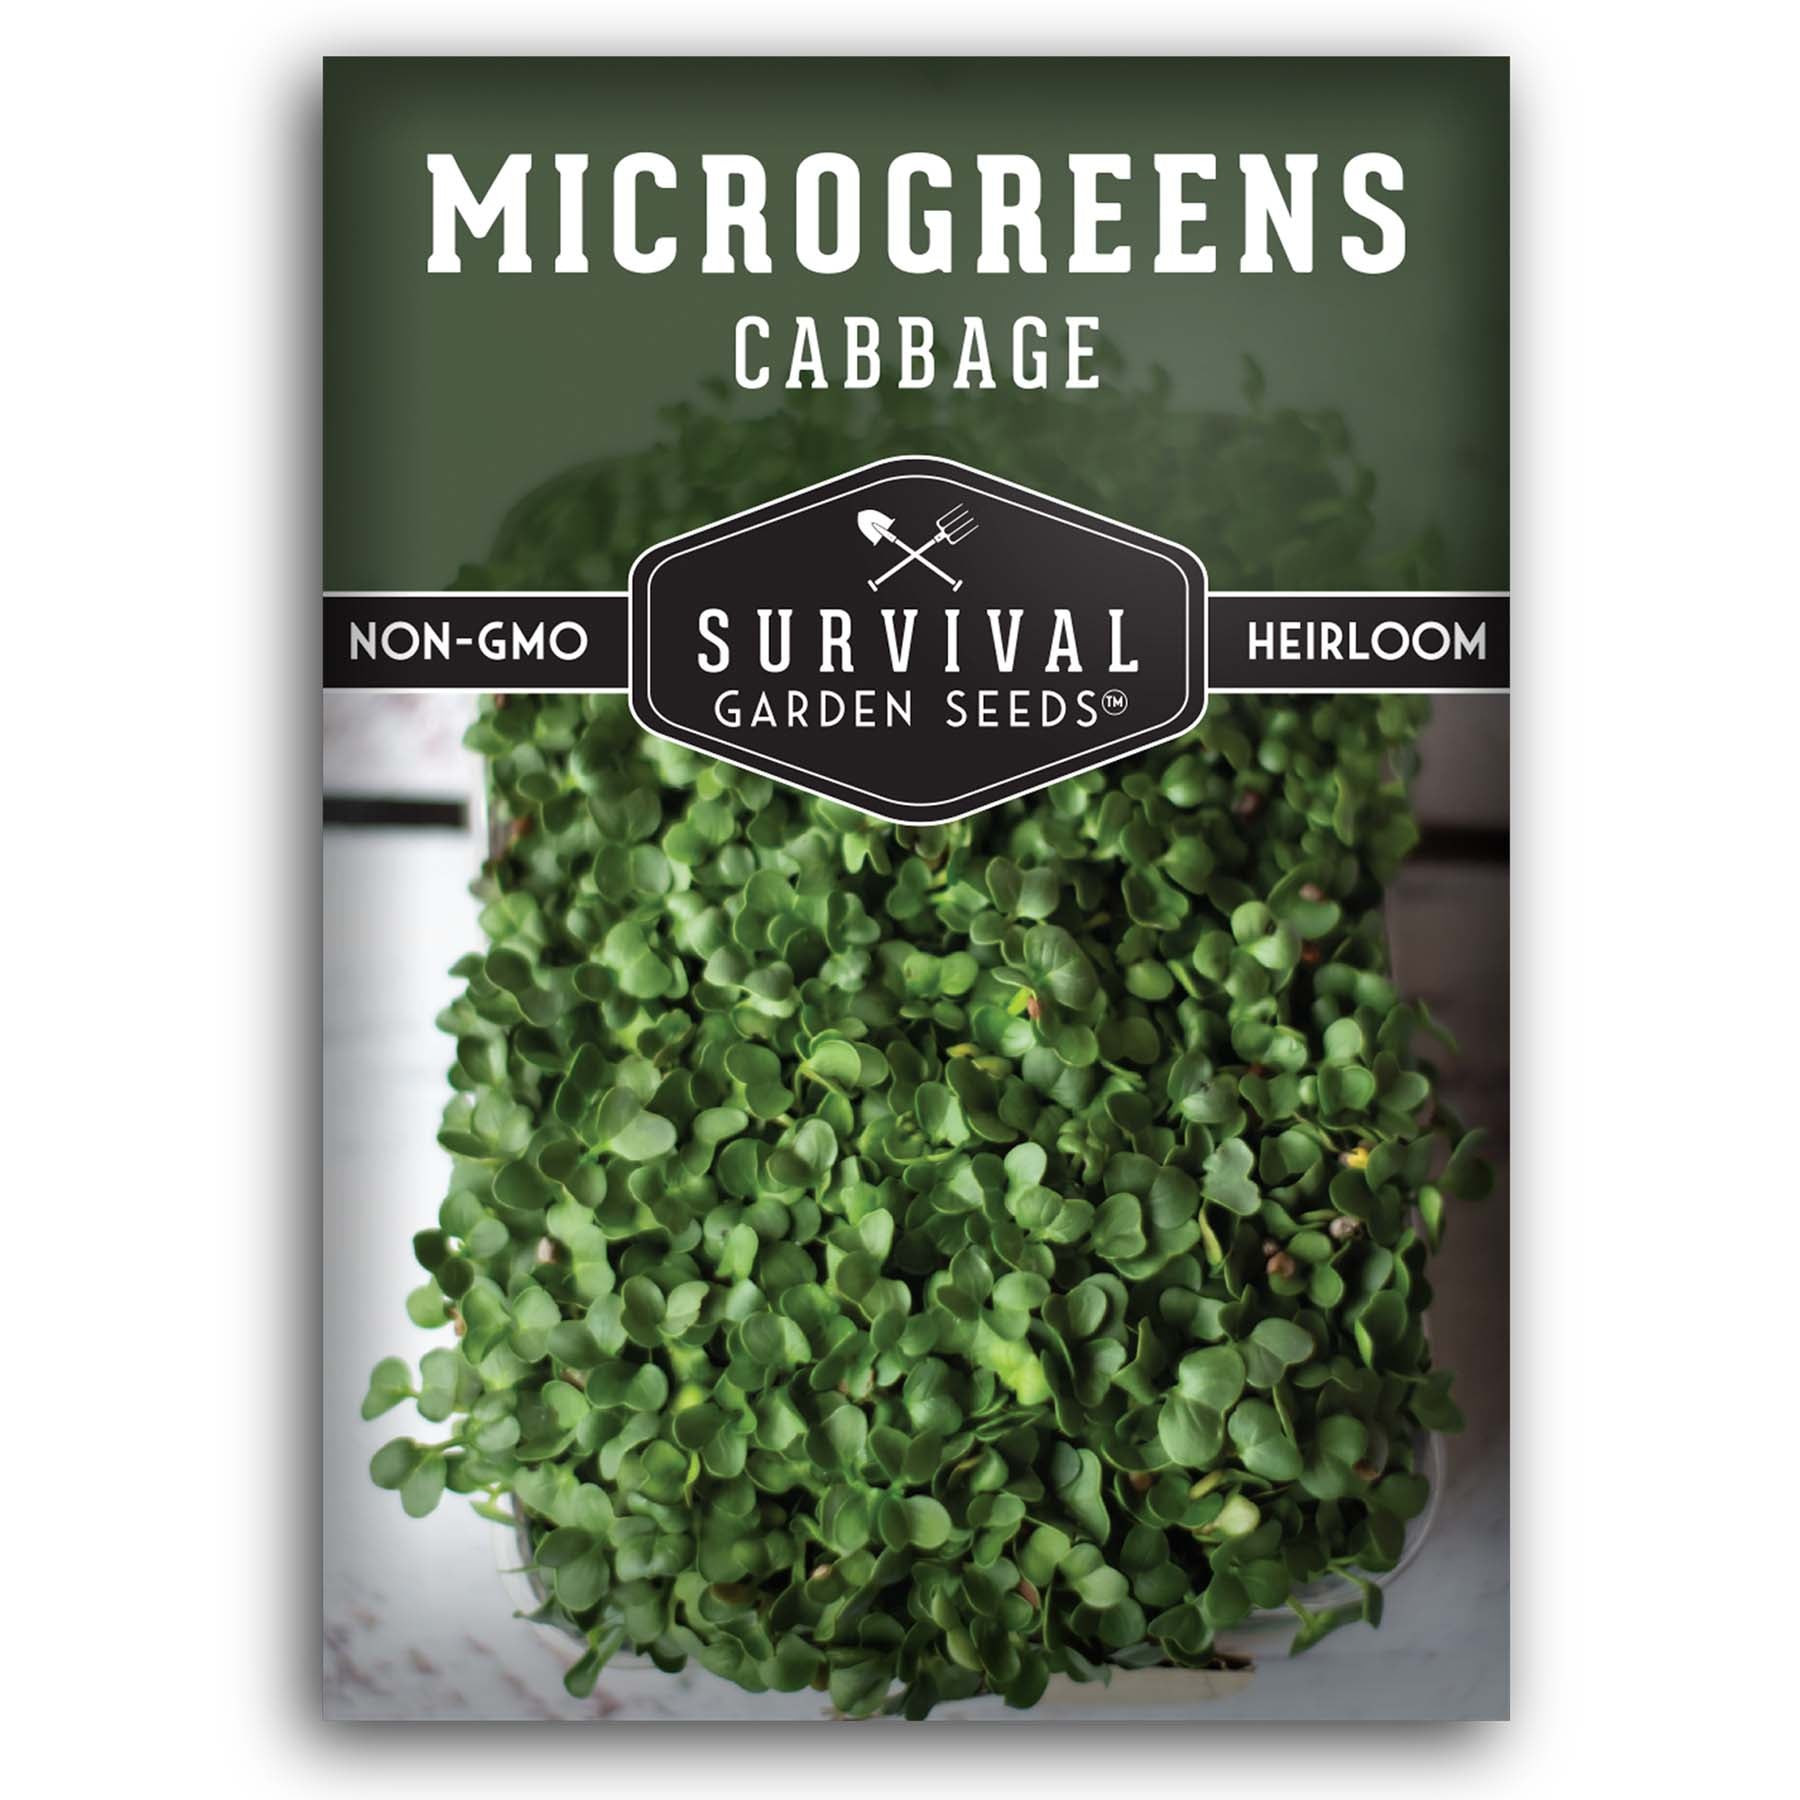 Cabbage microgreen seeds for sprouting